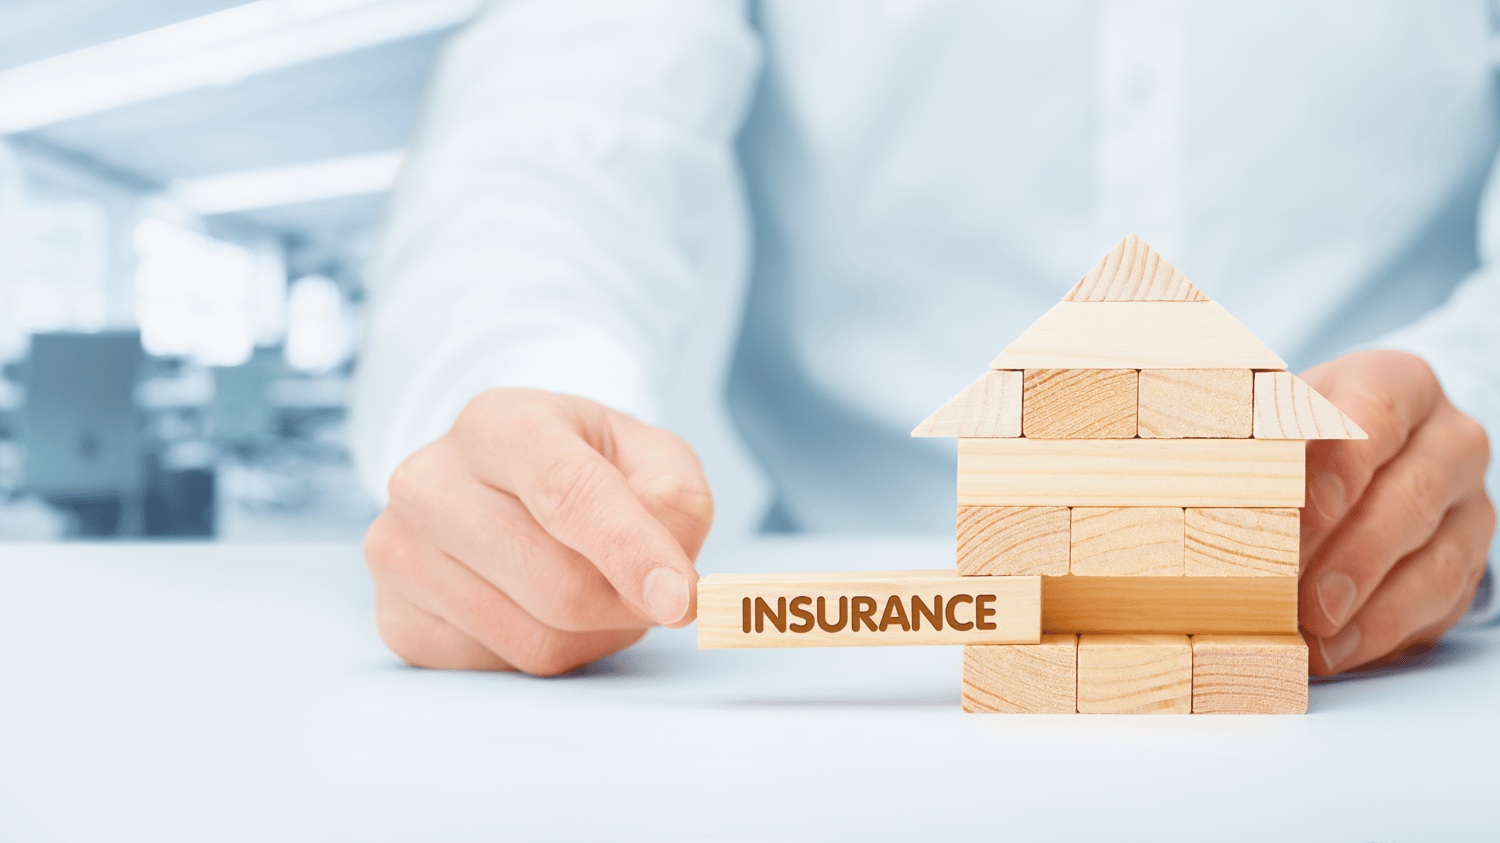 PROTECTING YOUR FUTURE: THE IMPORTANCE OF INSURANCE IN YOUR FINANCIAL PLAN